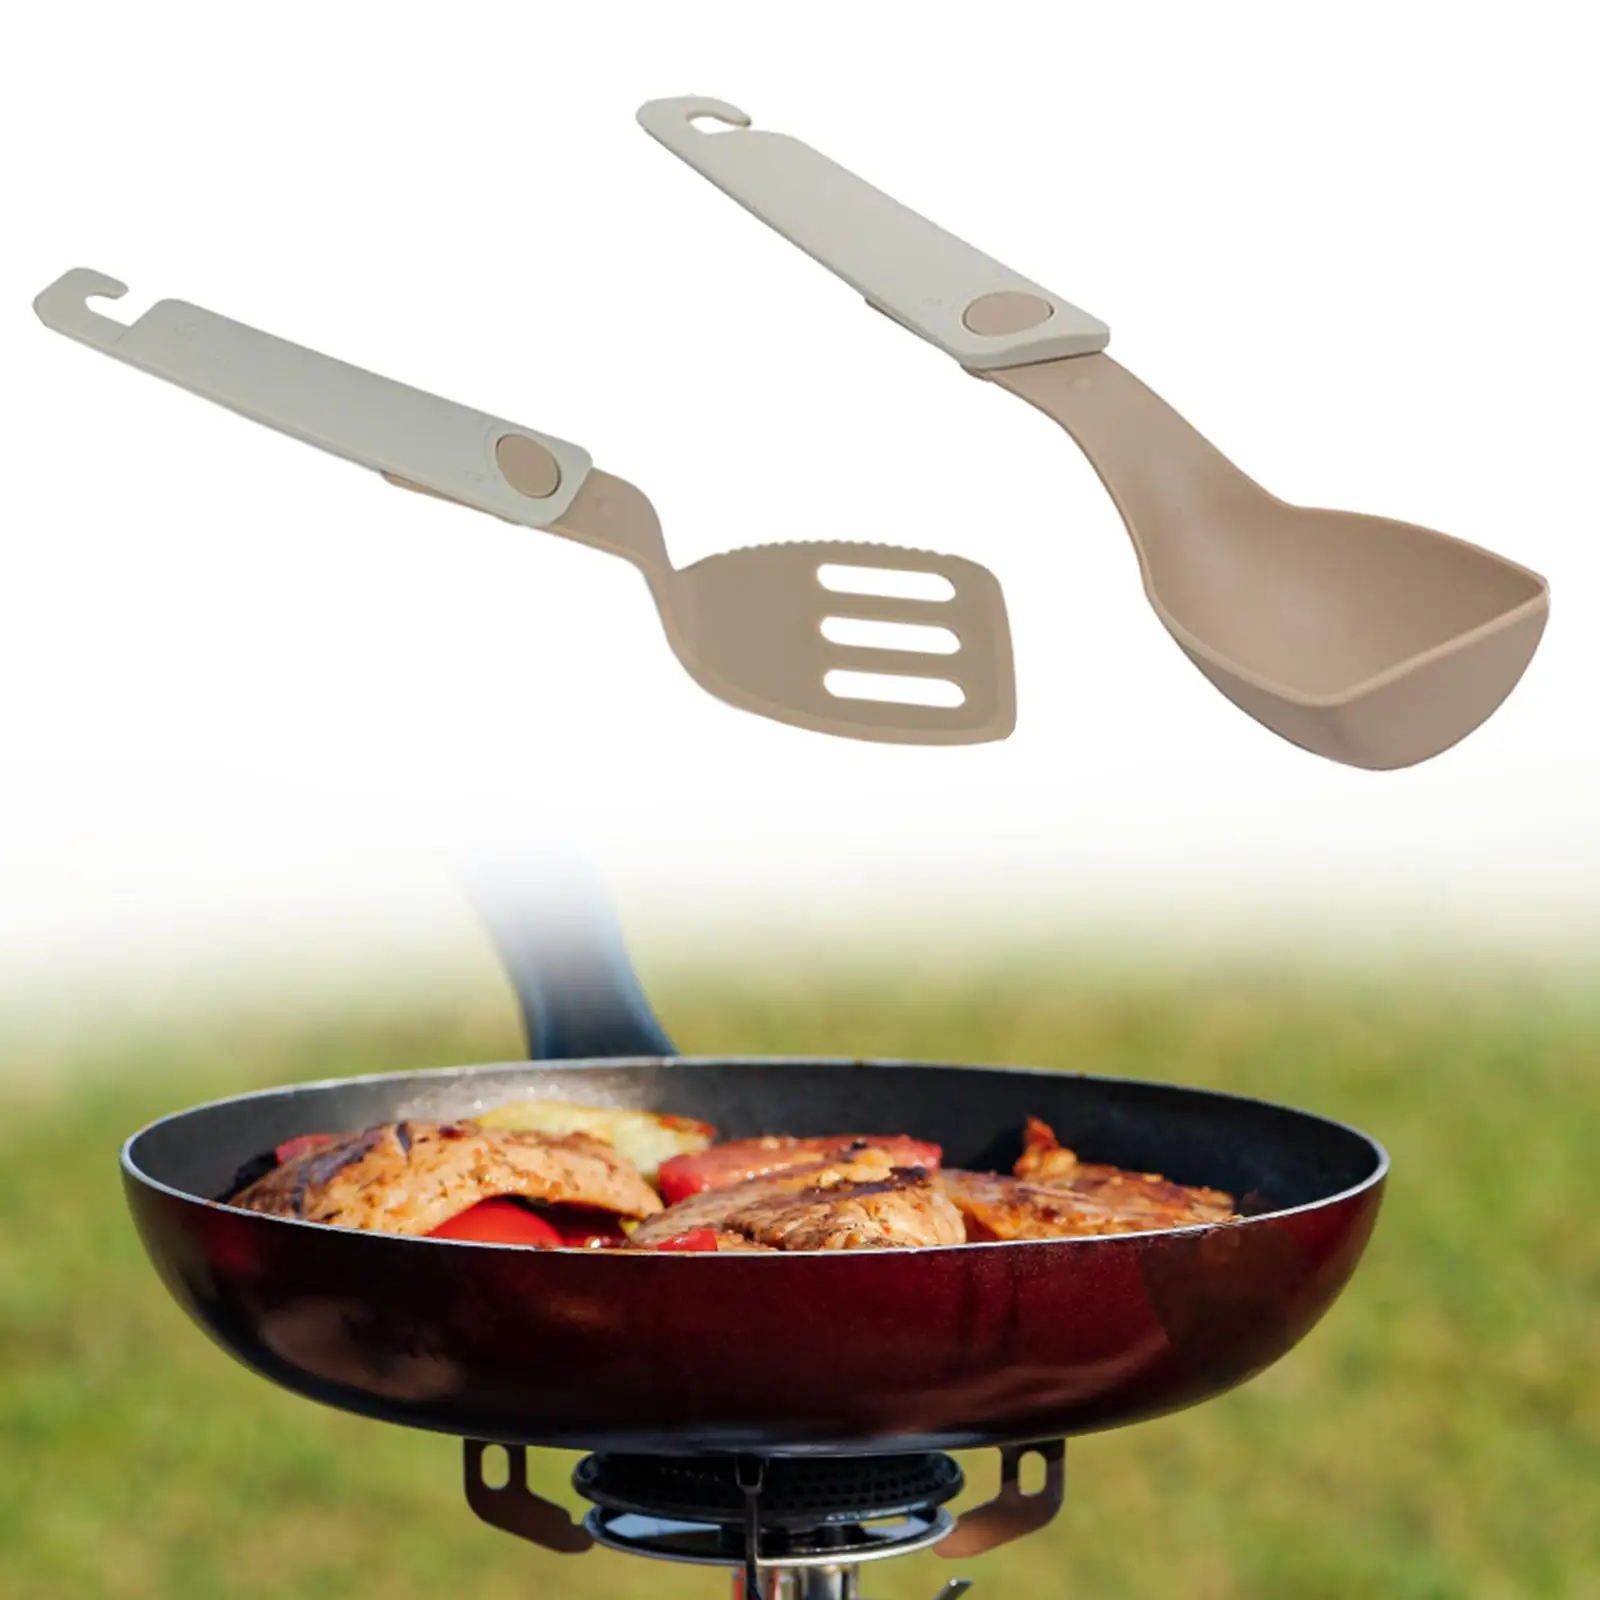 Camping Cutlery Folding Cooking Utensil Reusable Outdoor Tableware Cookware Flatware for Barbecue Kitchen Hiking BBQ Travel